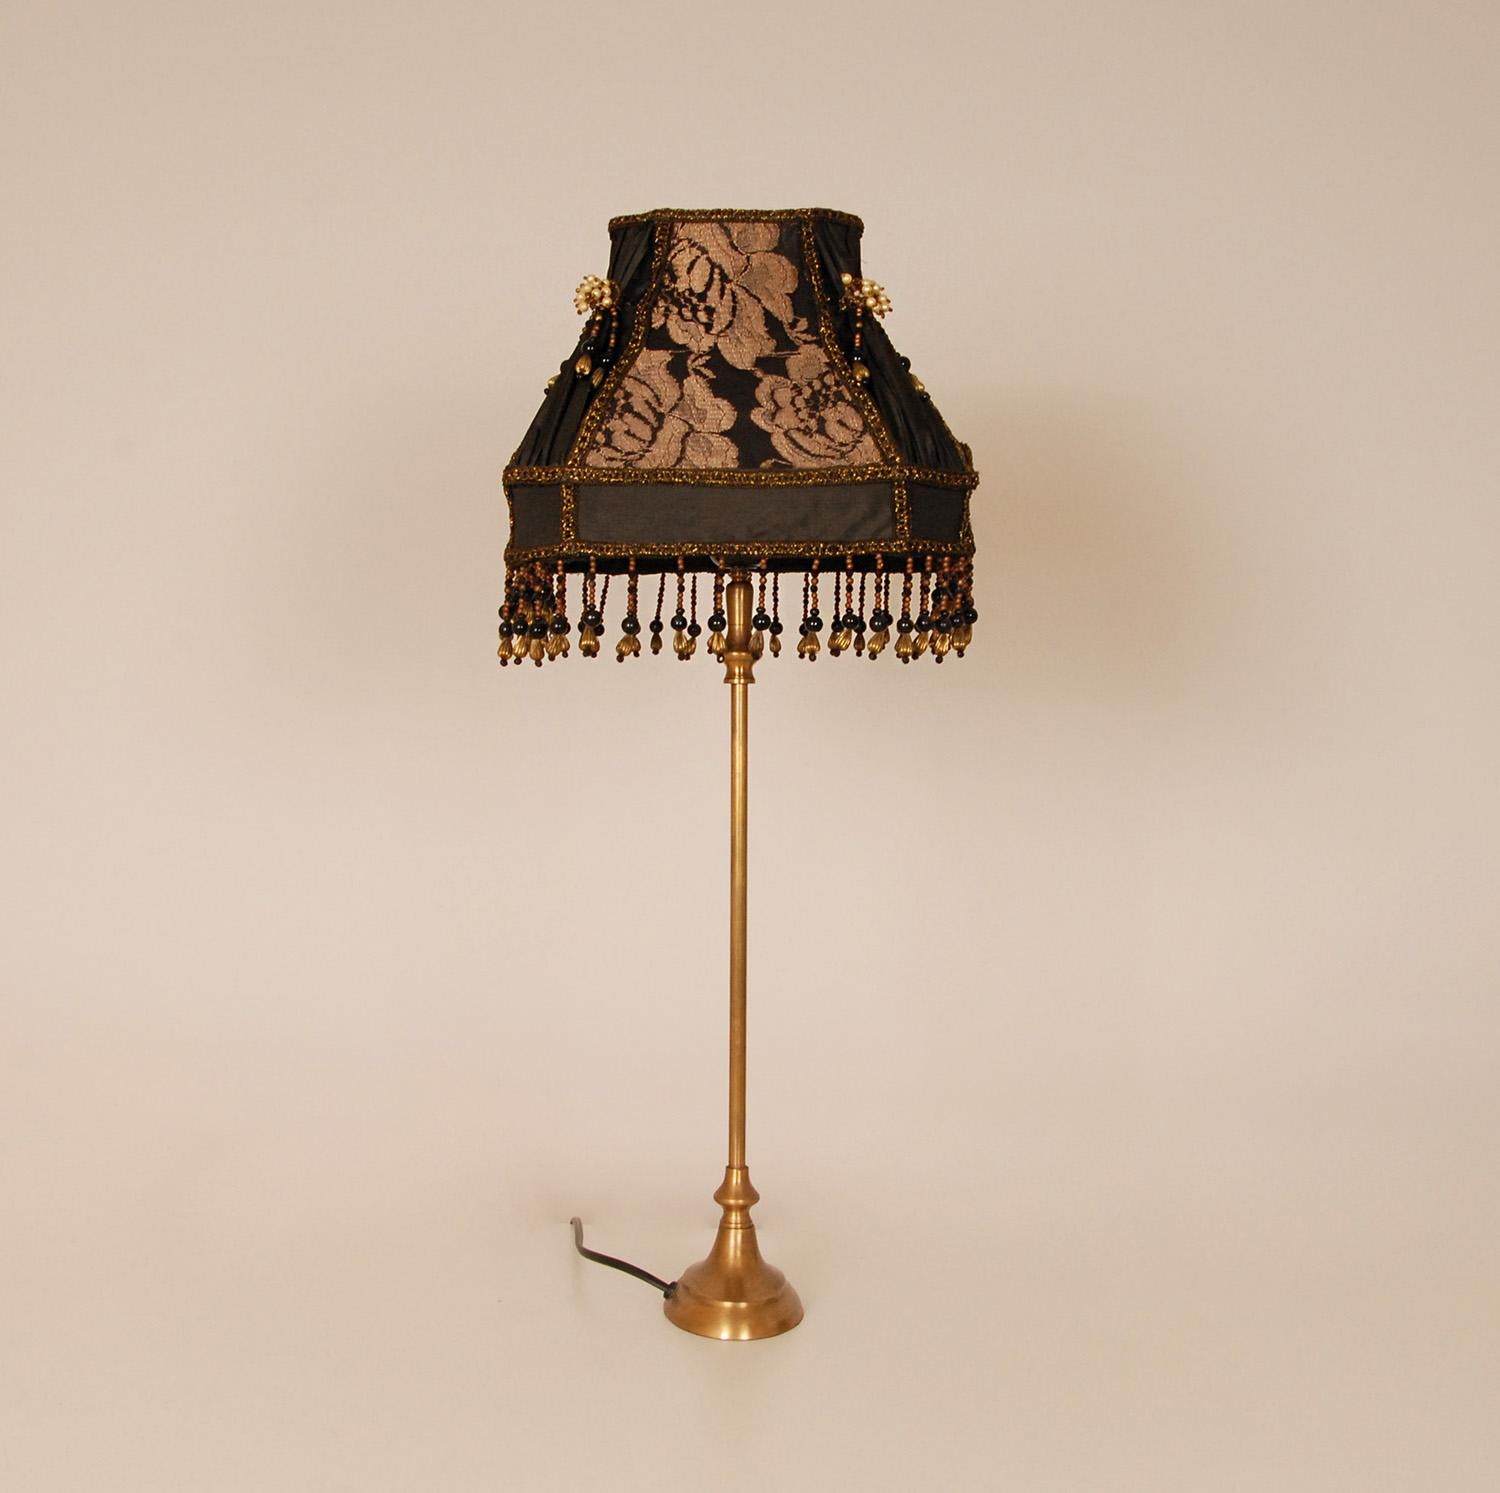 Metal Vintage French Baroque Lamp Fringed Beaded 1970s Gold and Black For Sale